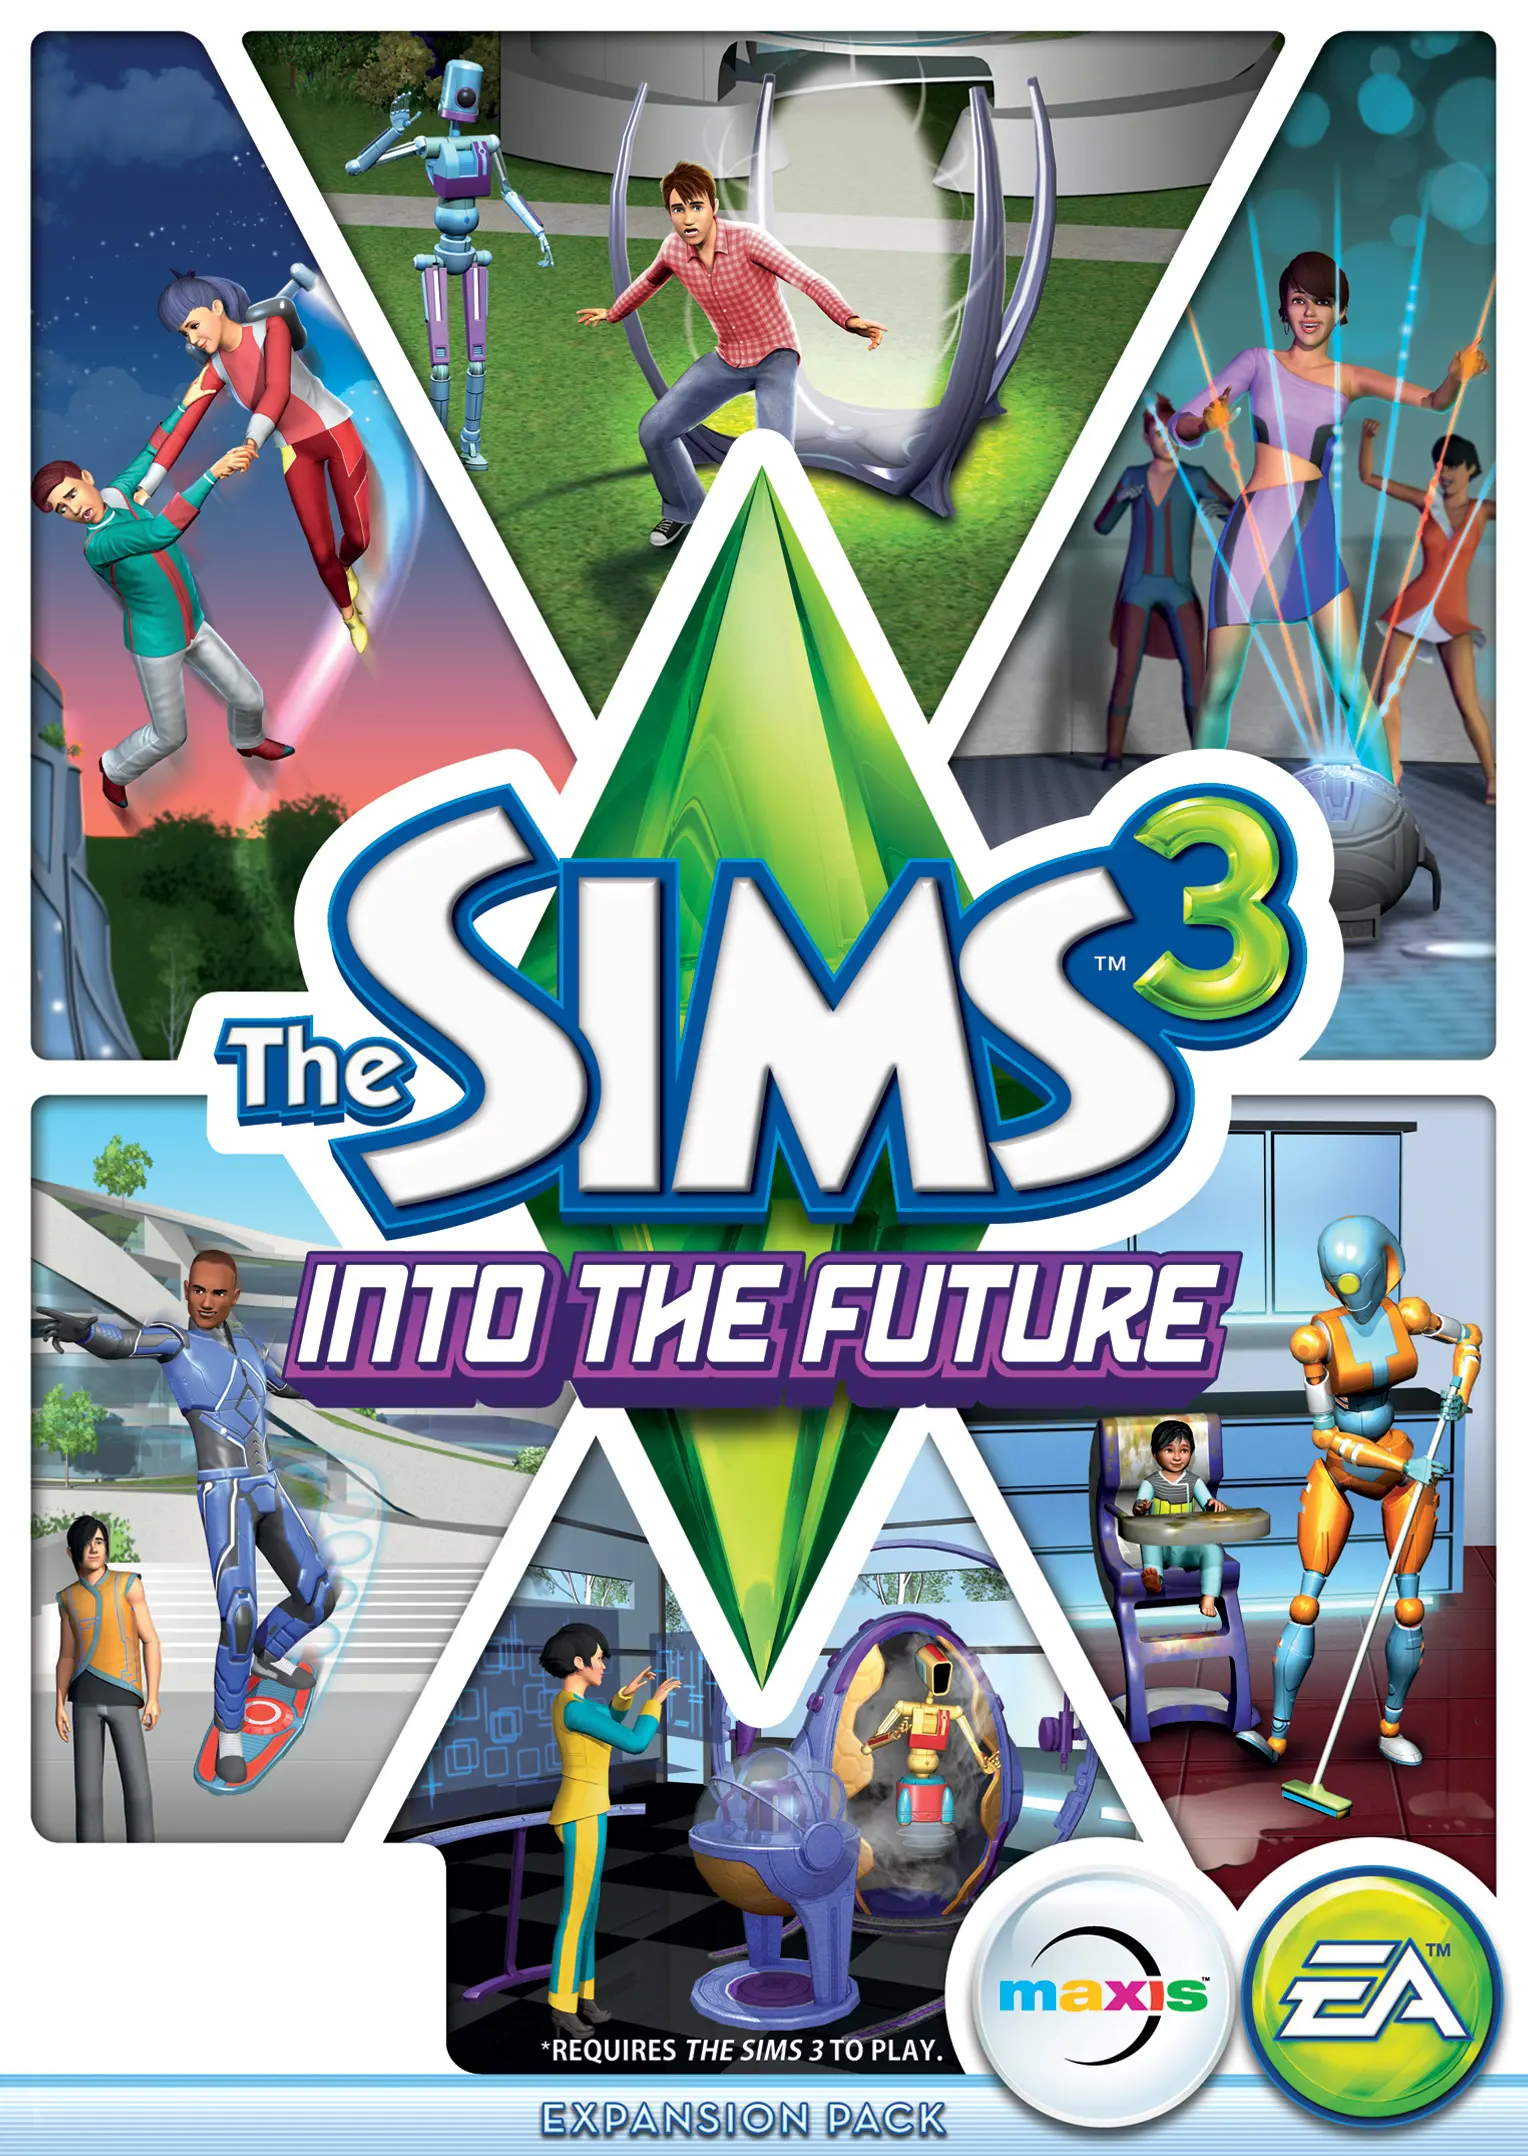 The Sims 3 - Into the Future Expansion Pack (PC) - EA Play - Digital Code